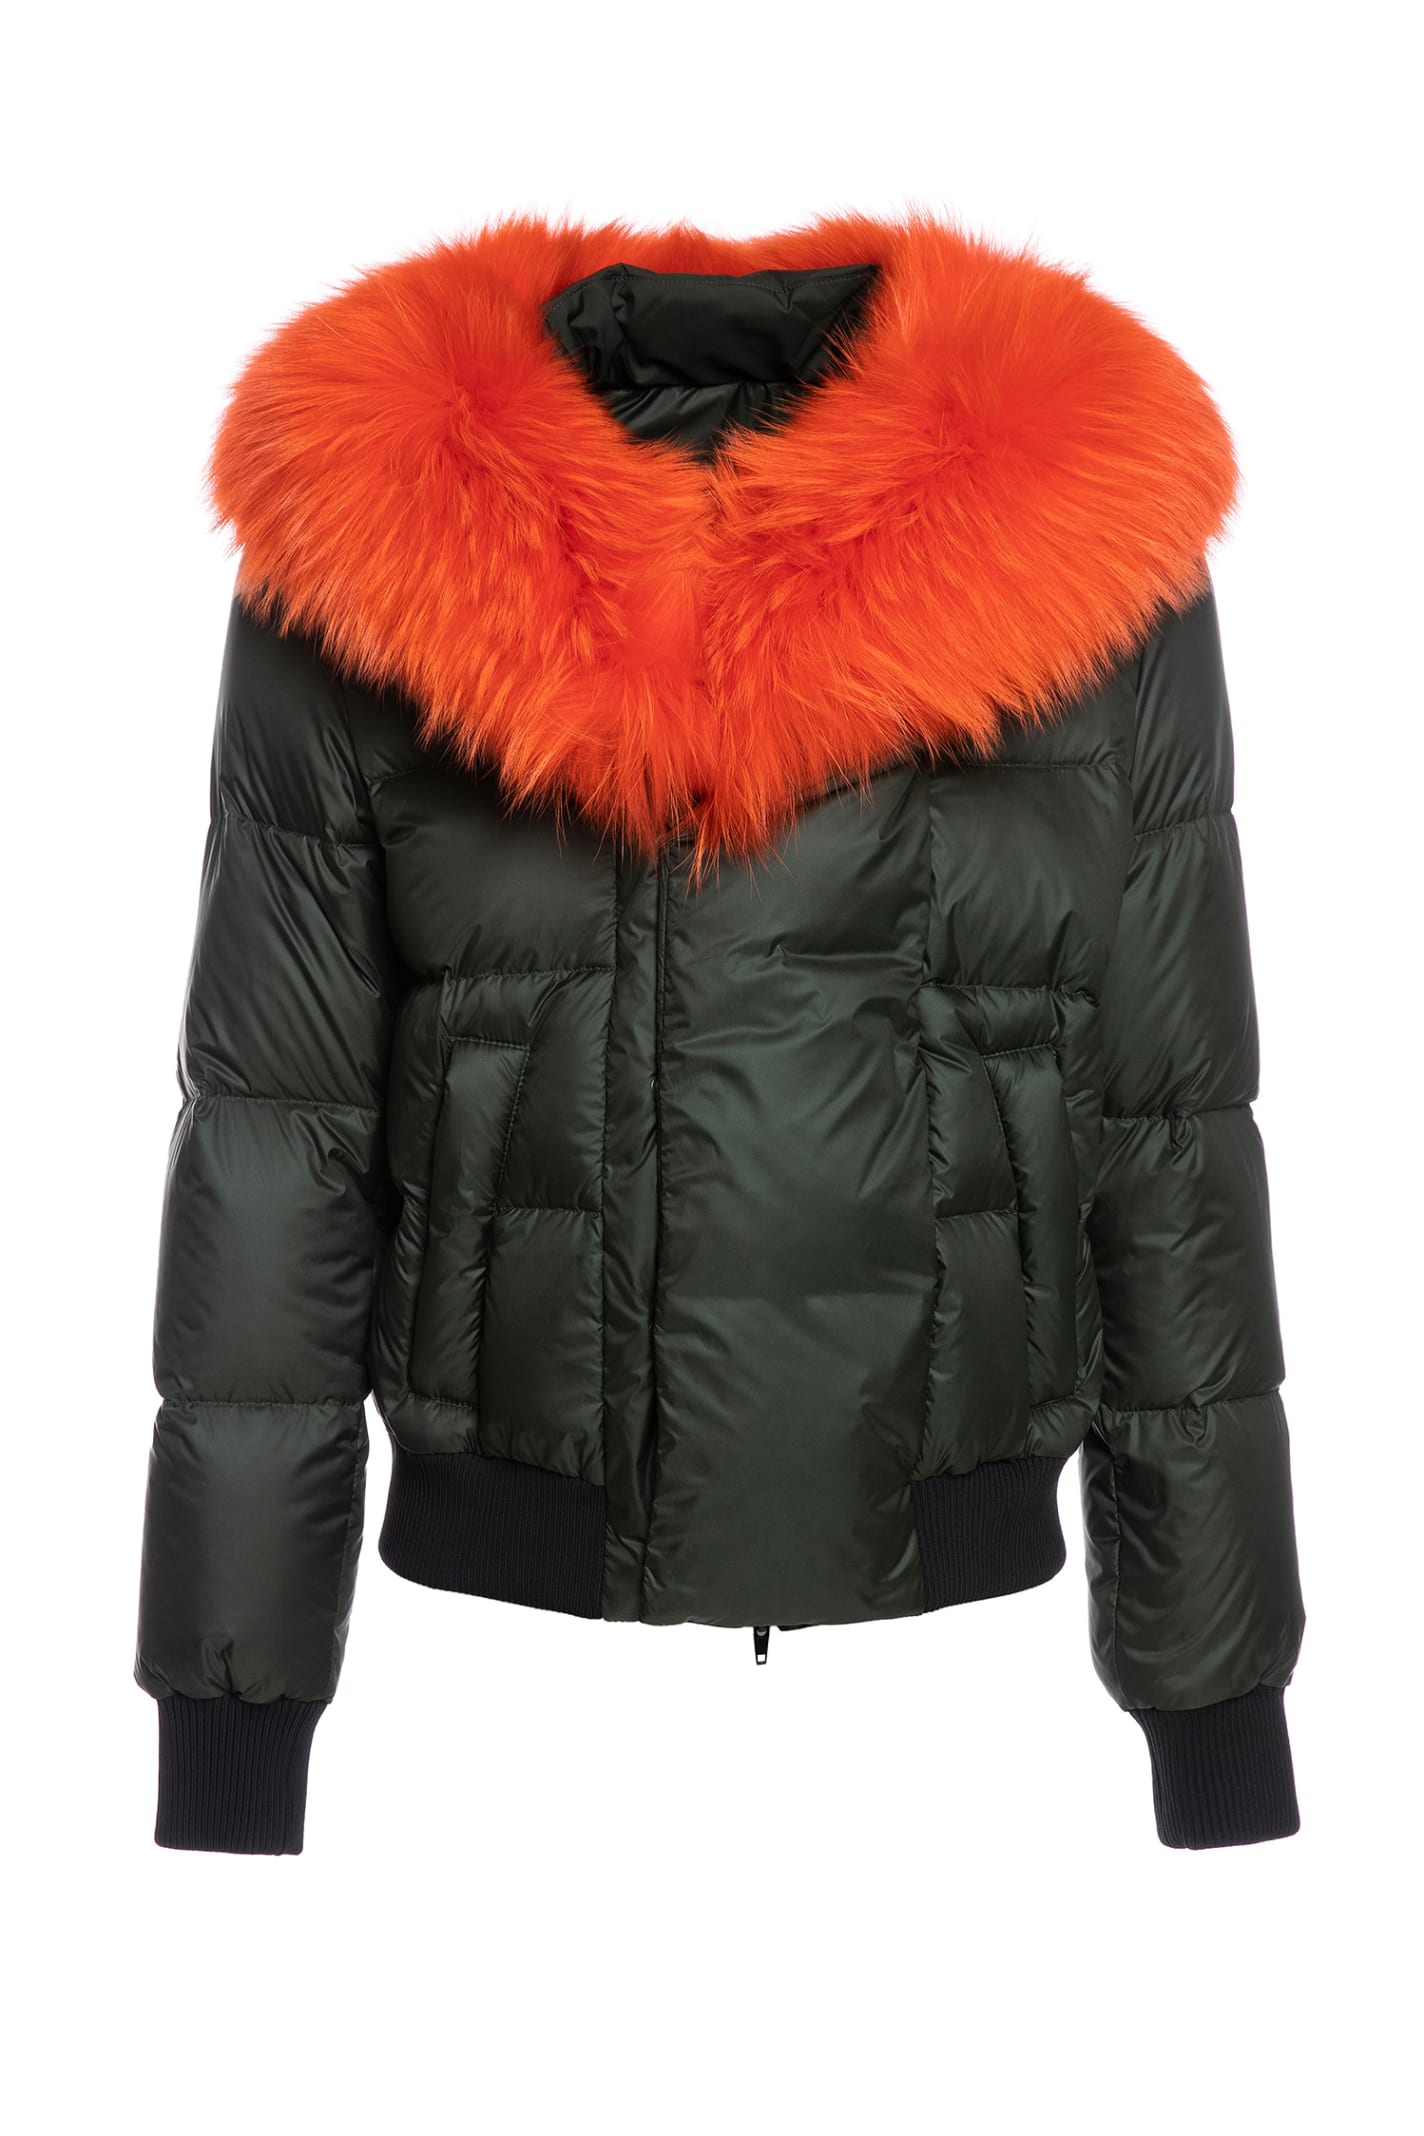 Mr & Mrs Italy Short Puffer Jacket For Woman With Raccoon Fur